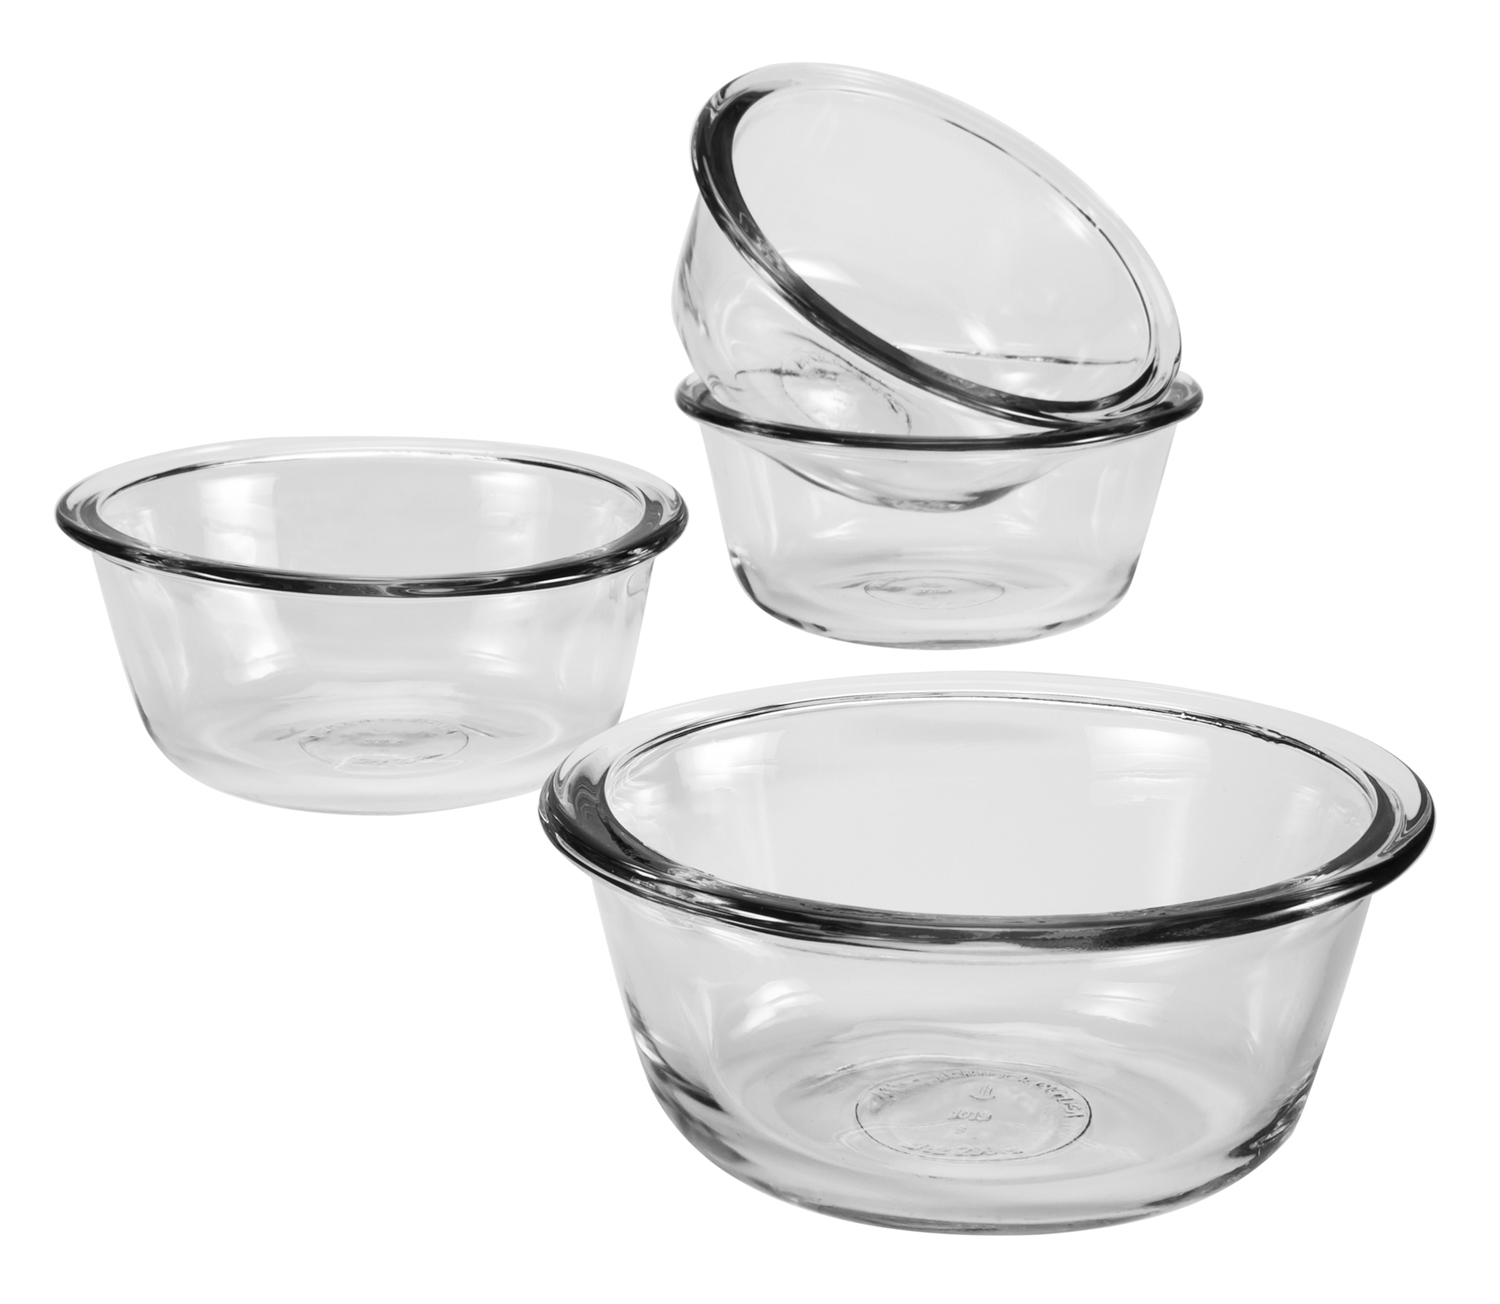 Anchor Hocking 6-Ounce Custard Cups Frustration Free Packaging Set of 4